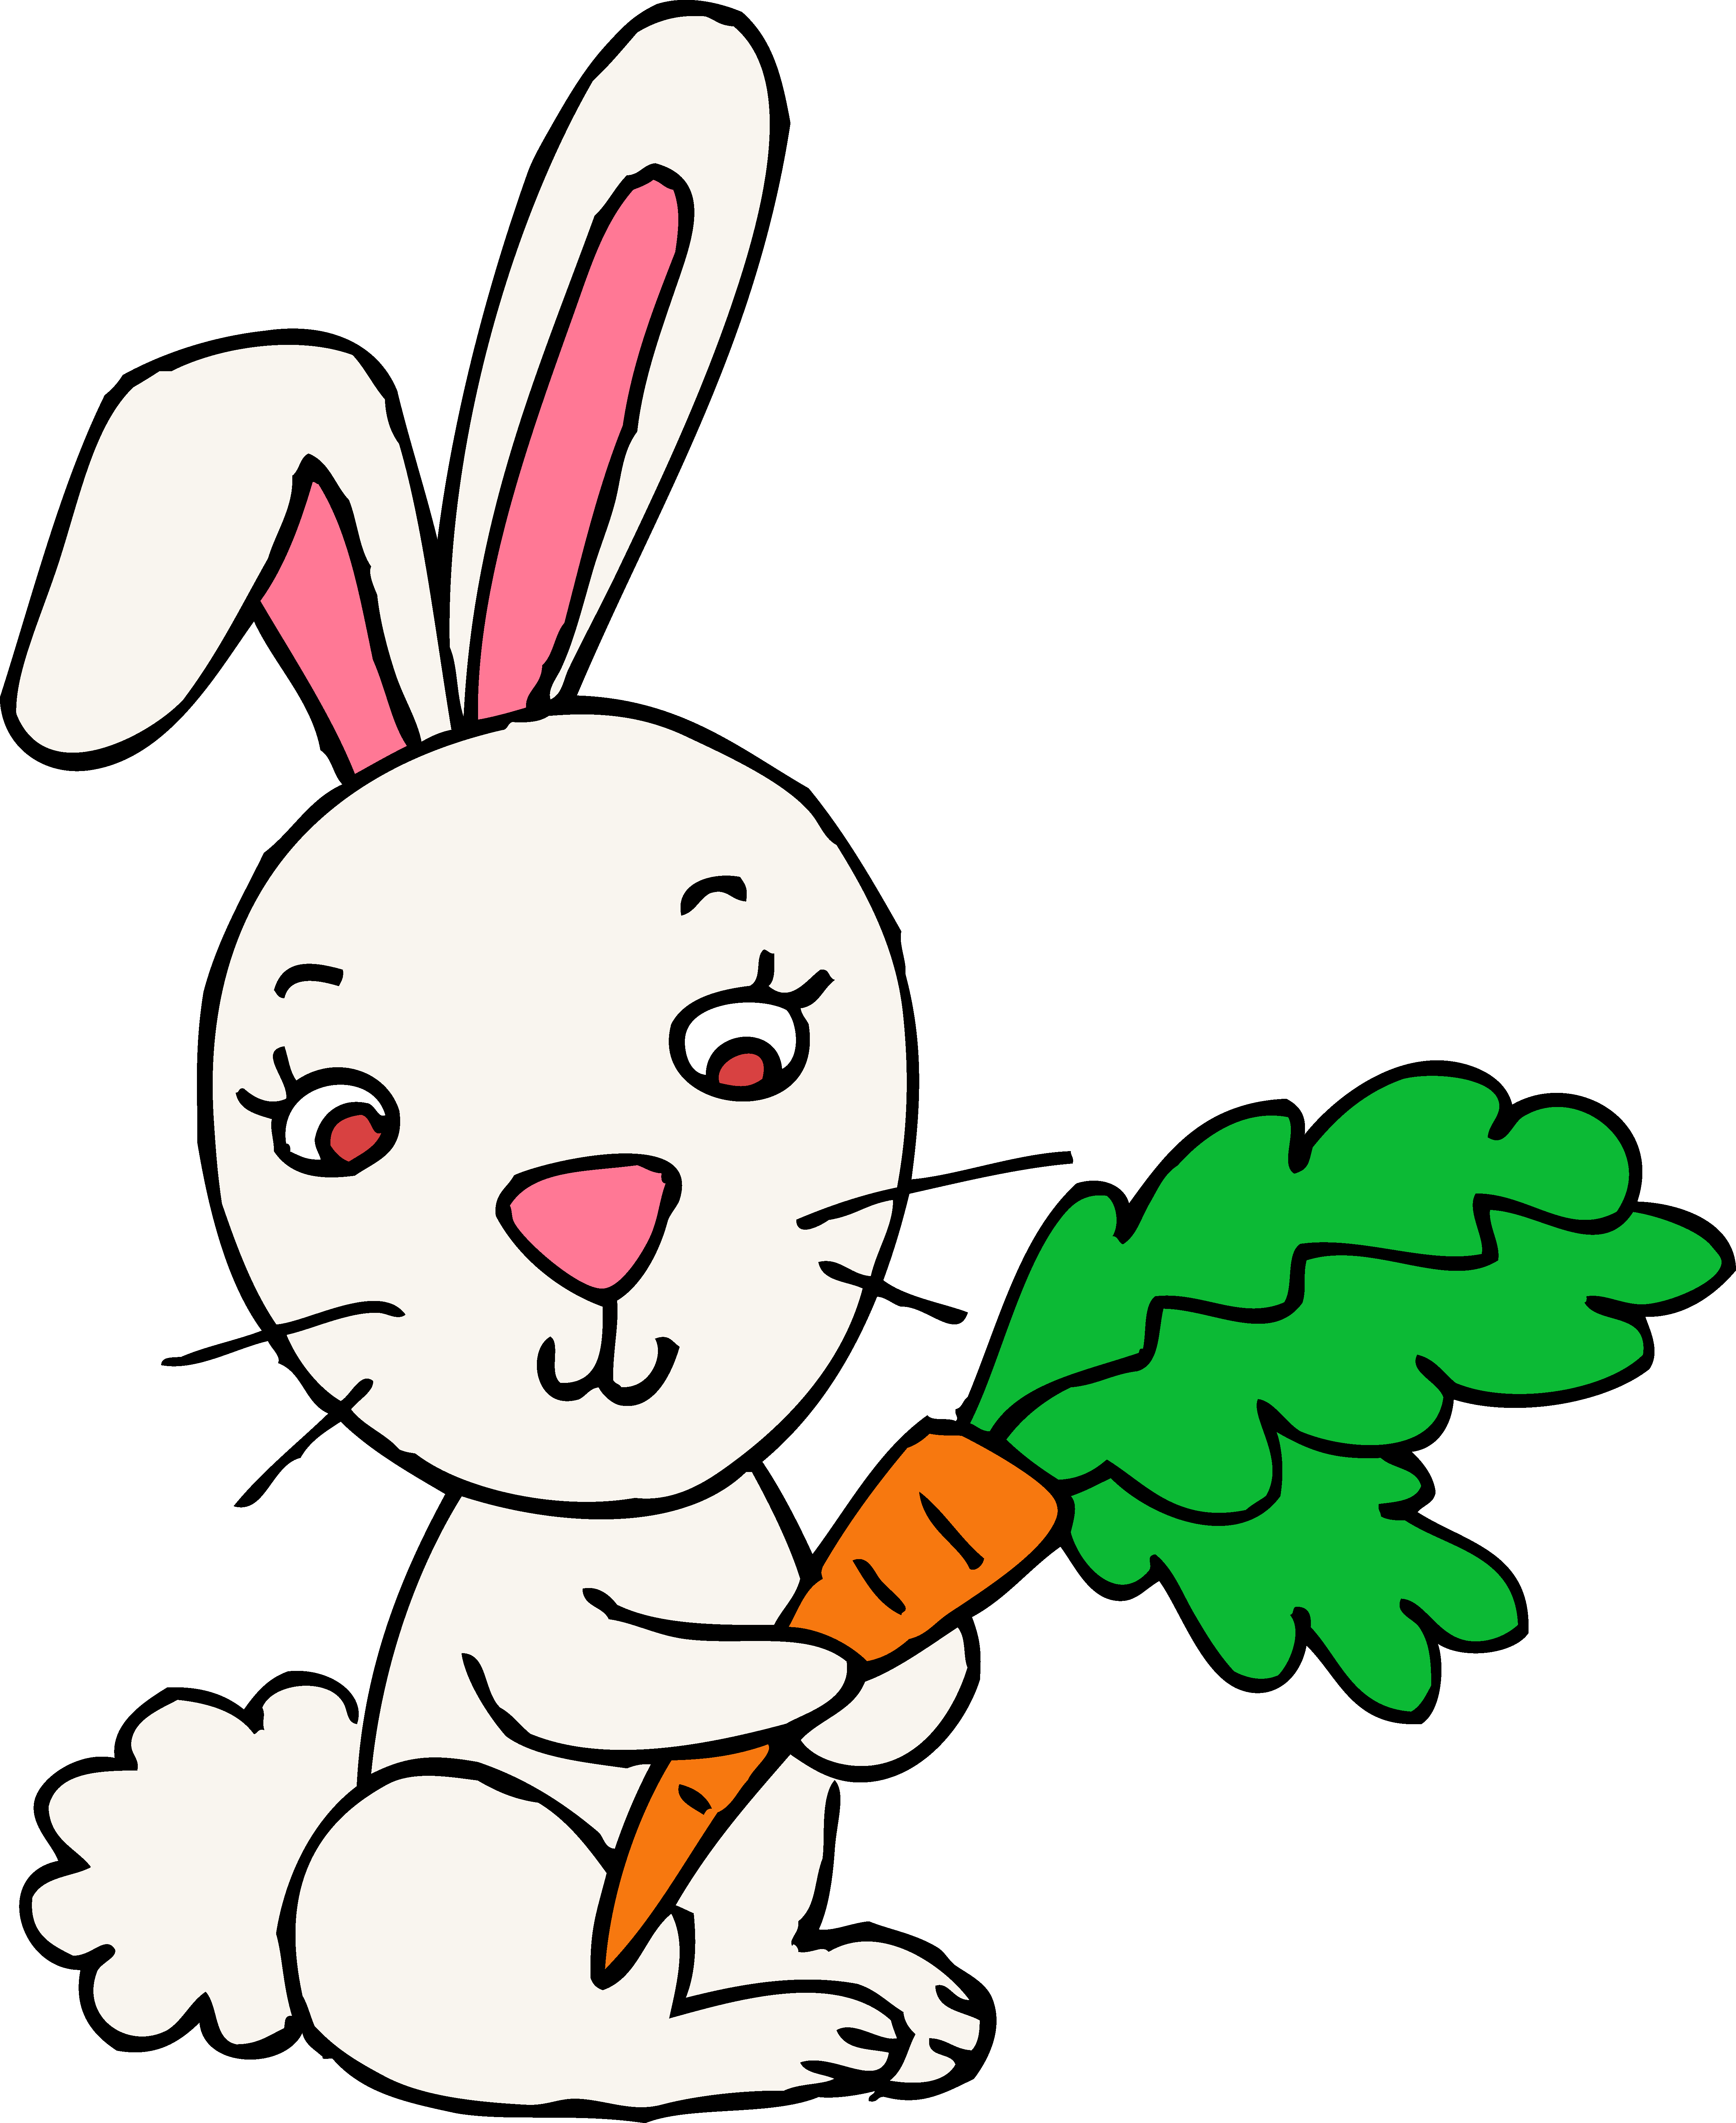 Rabbit clipart #4, Download drawings